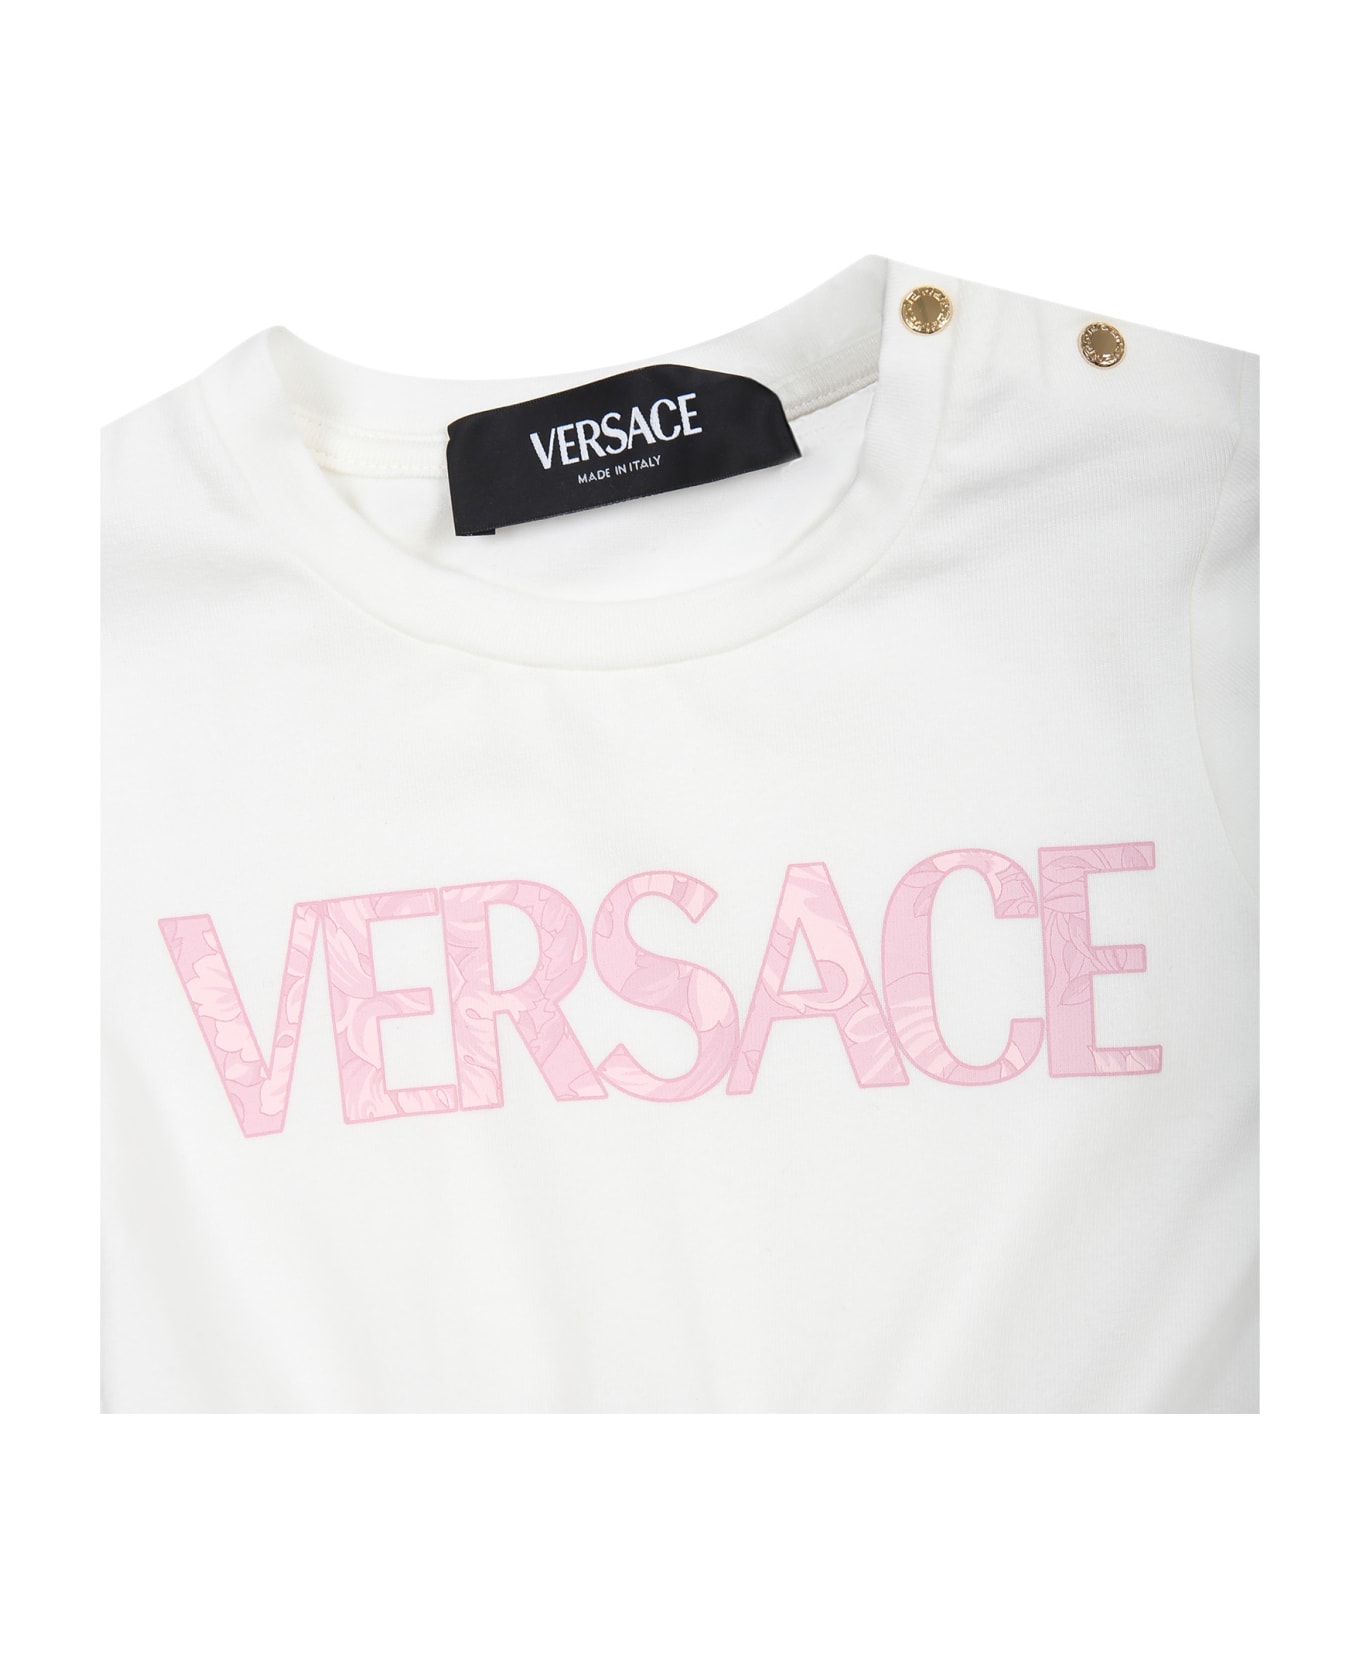 Versace Pink Dress For Baby Girl With Baroque Print And Logo - Pink